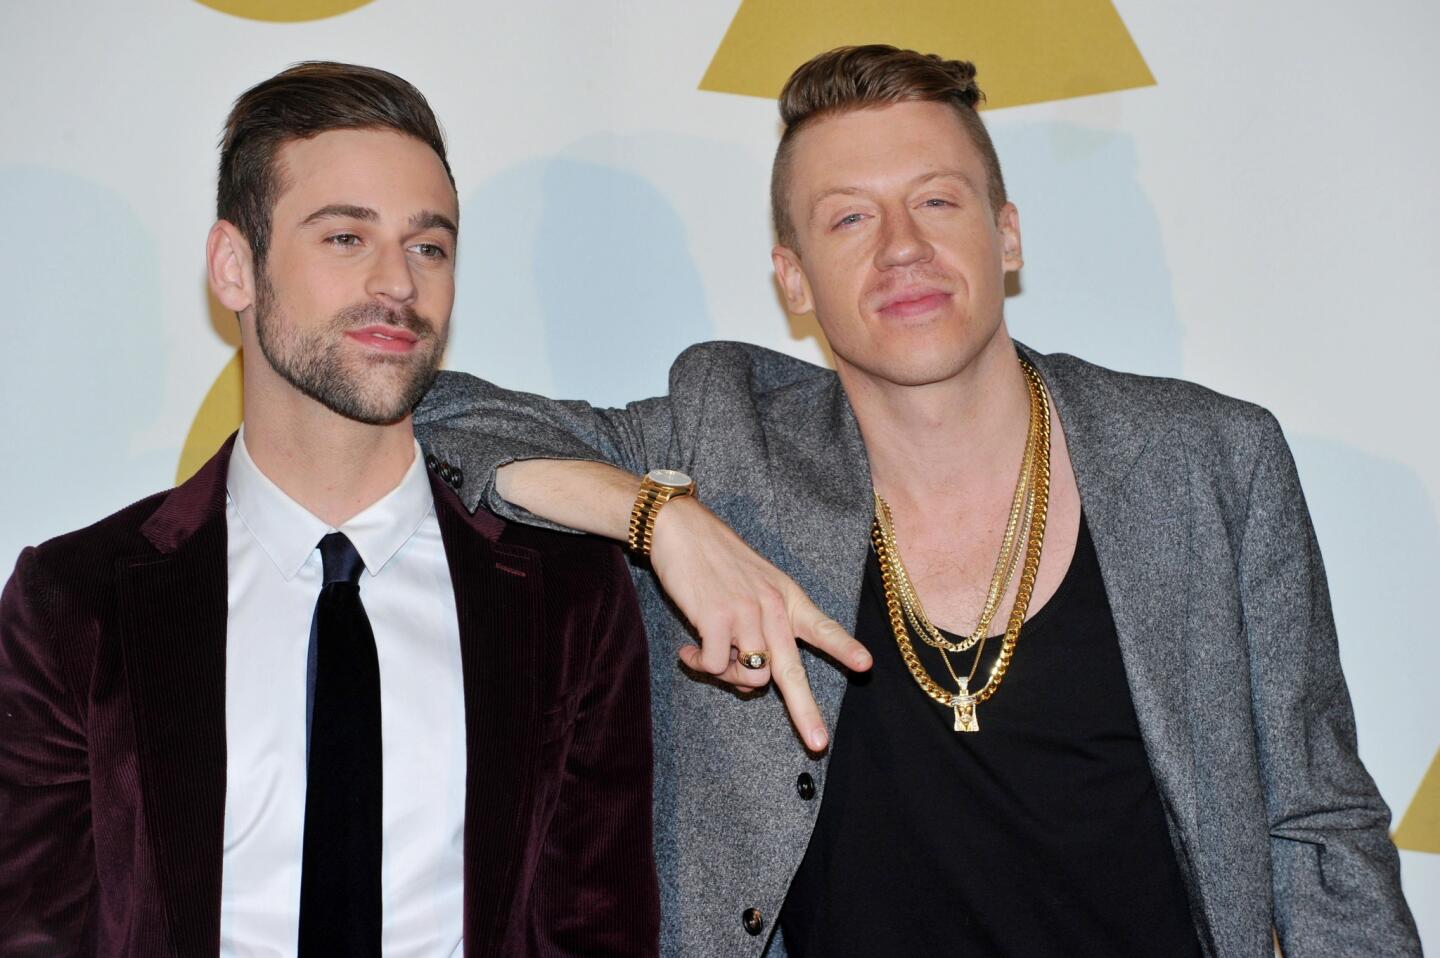 Ryan Lewis, left, and Macklemore pose backstage at the "Grammy Nominations Concert Live!" on Friday at the Nokia Theatre at L.A. Live.